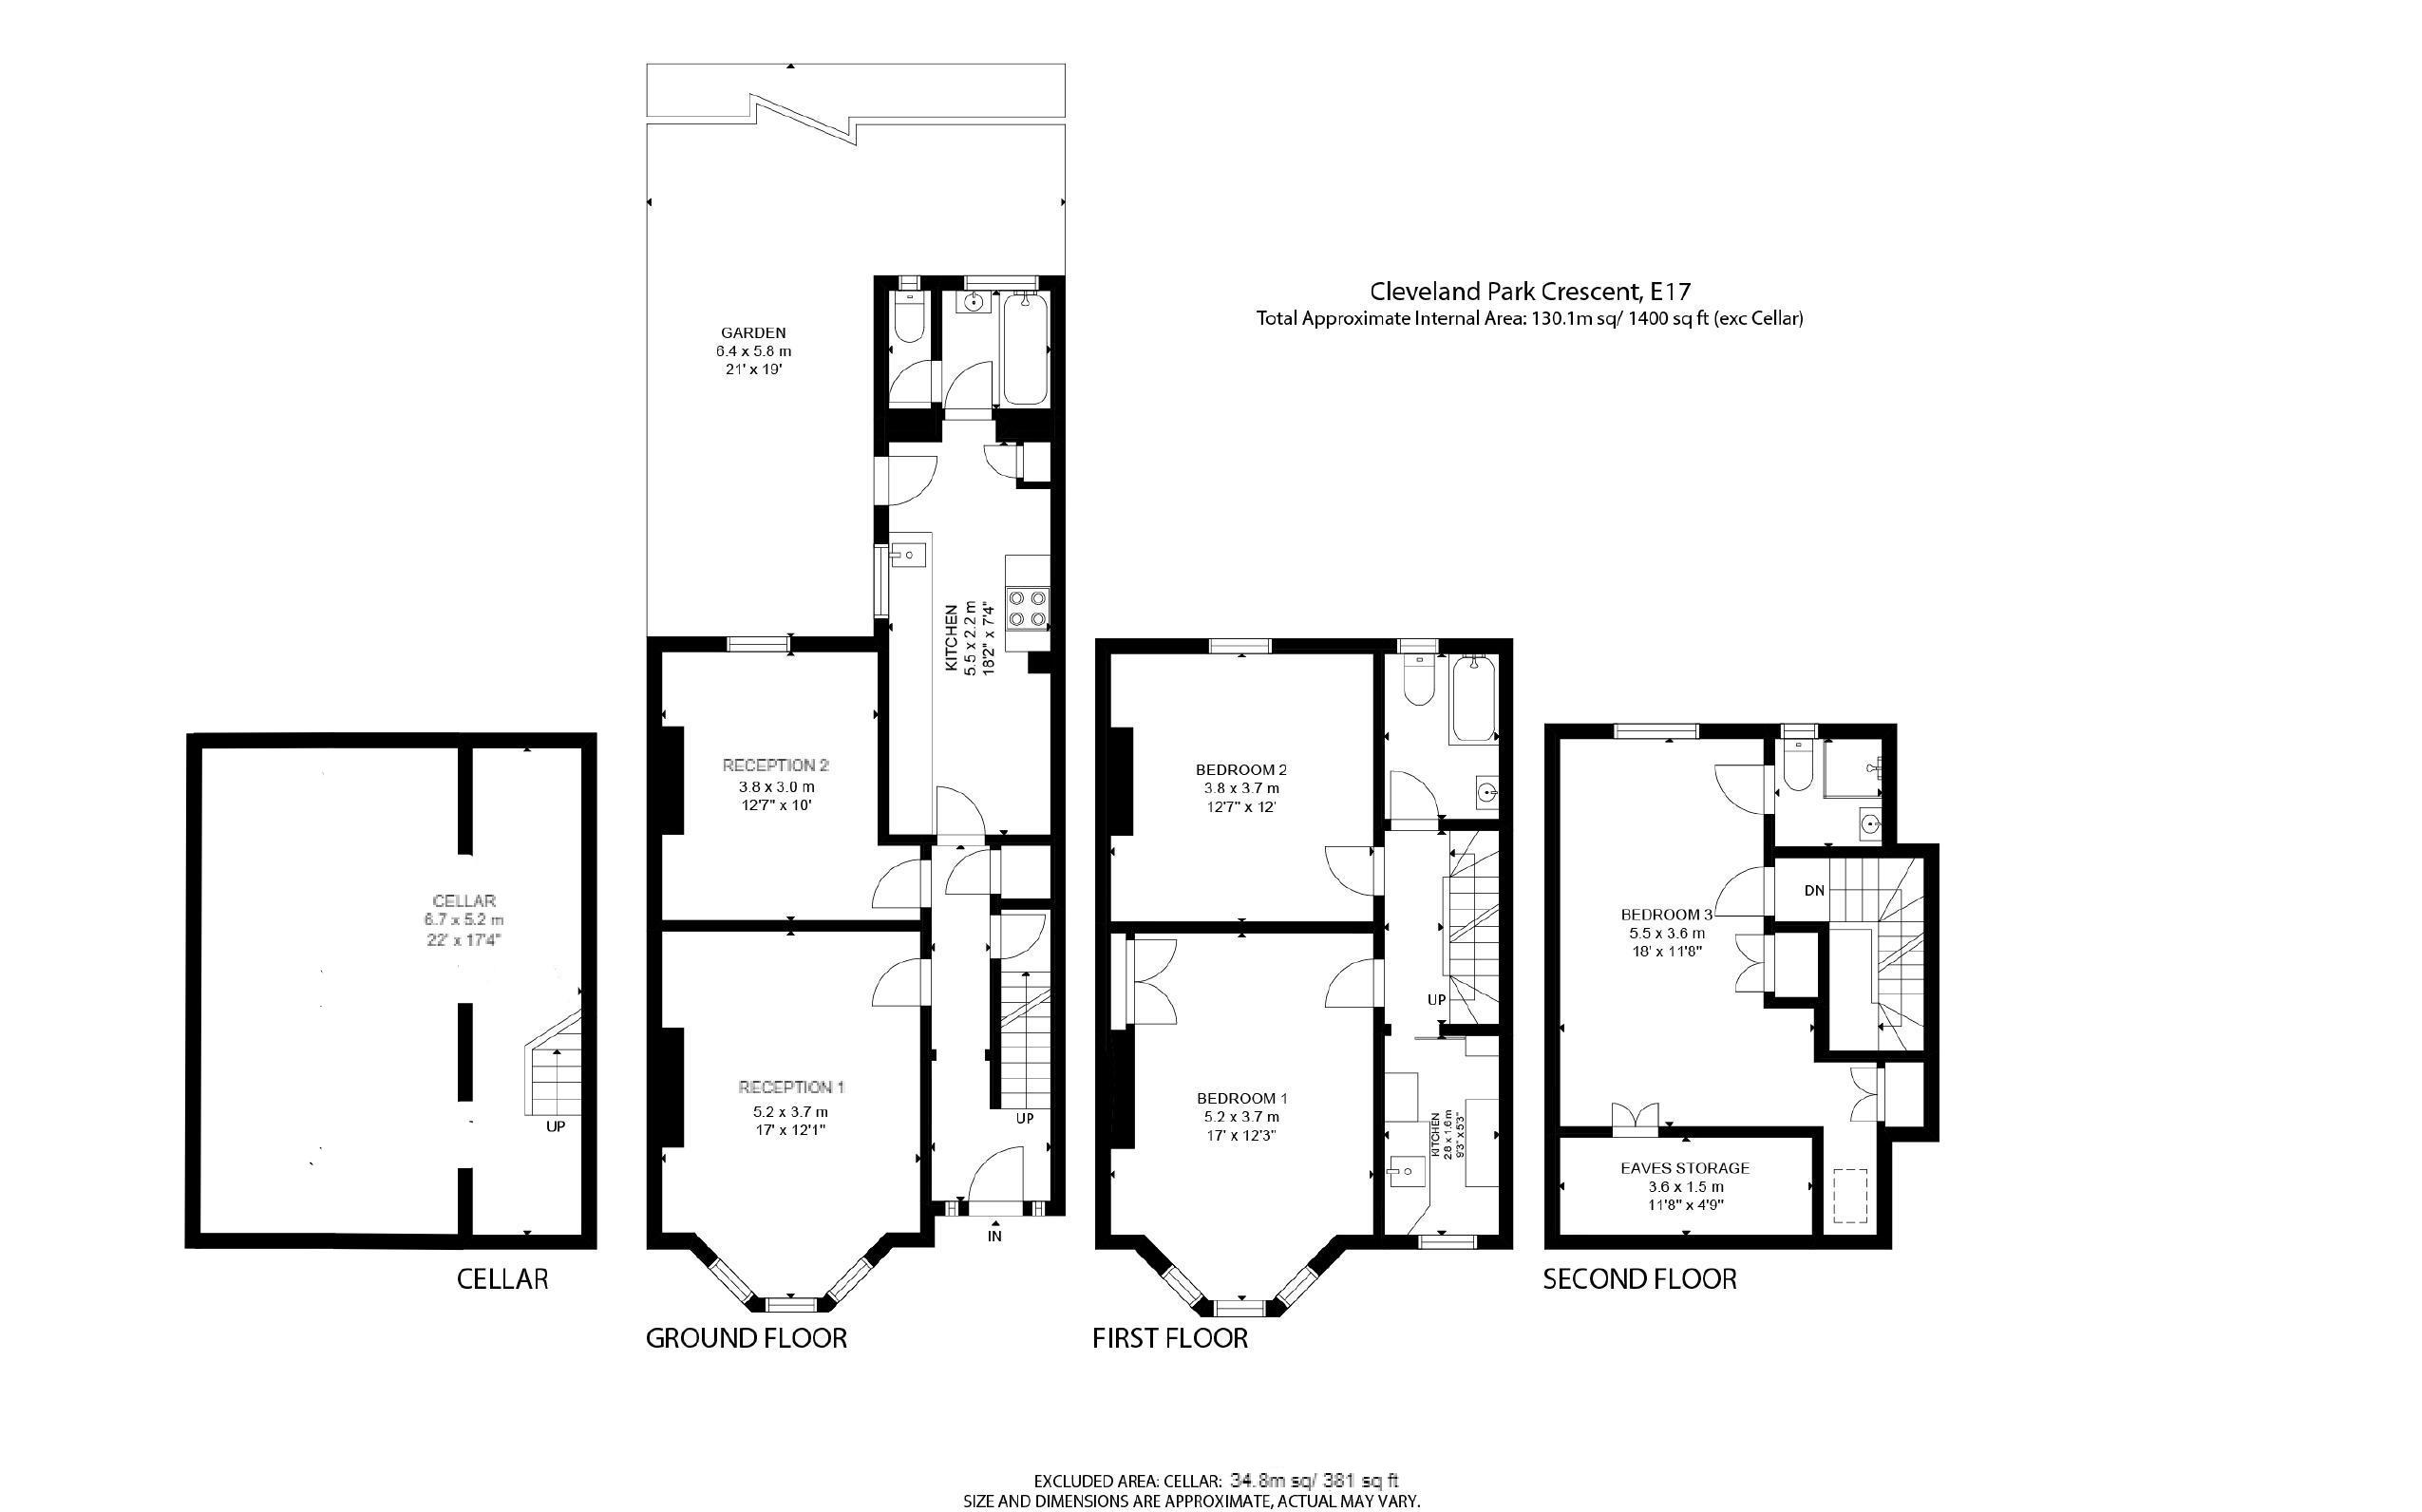 4 bed terraced house for sale in Cleveland Park Crescent, Walthamstow - Property floorplan